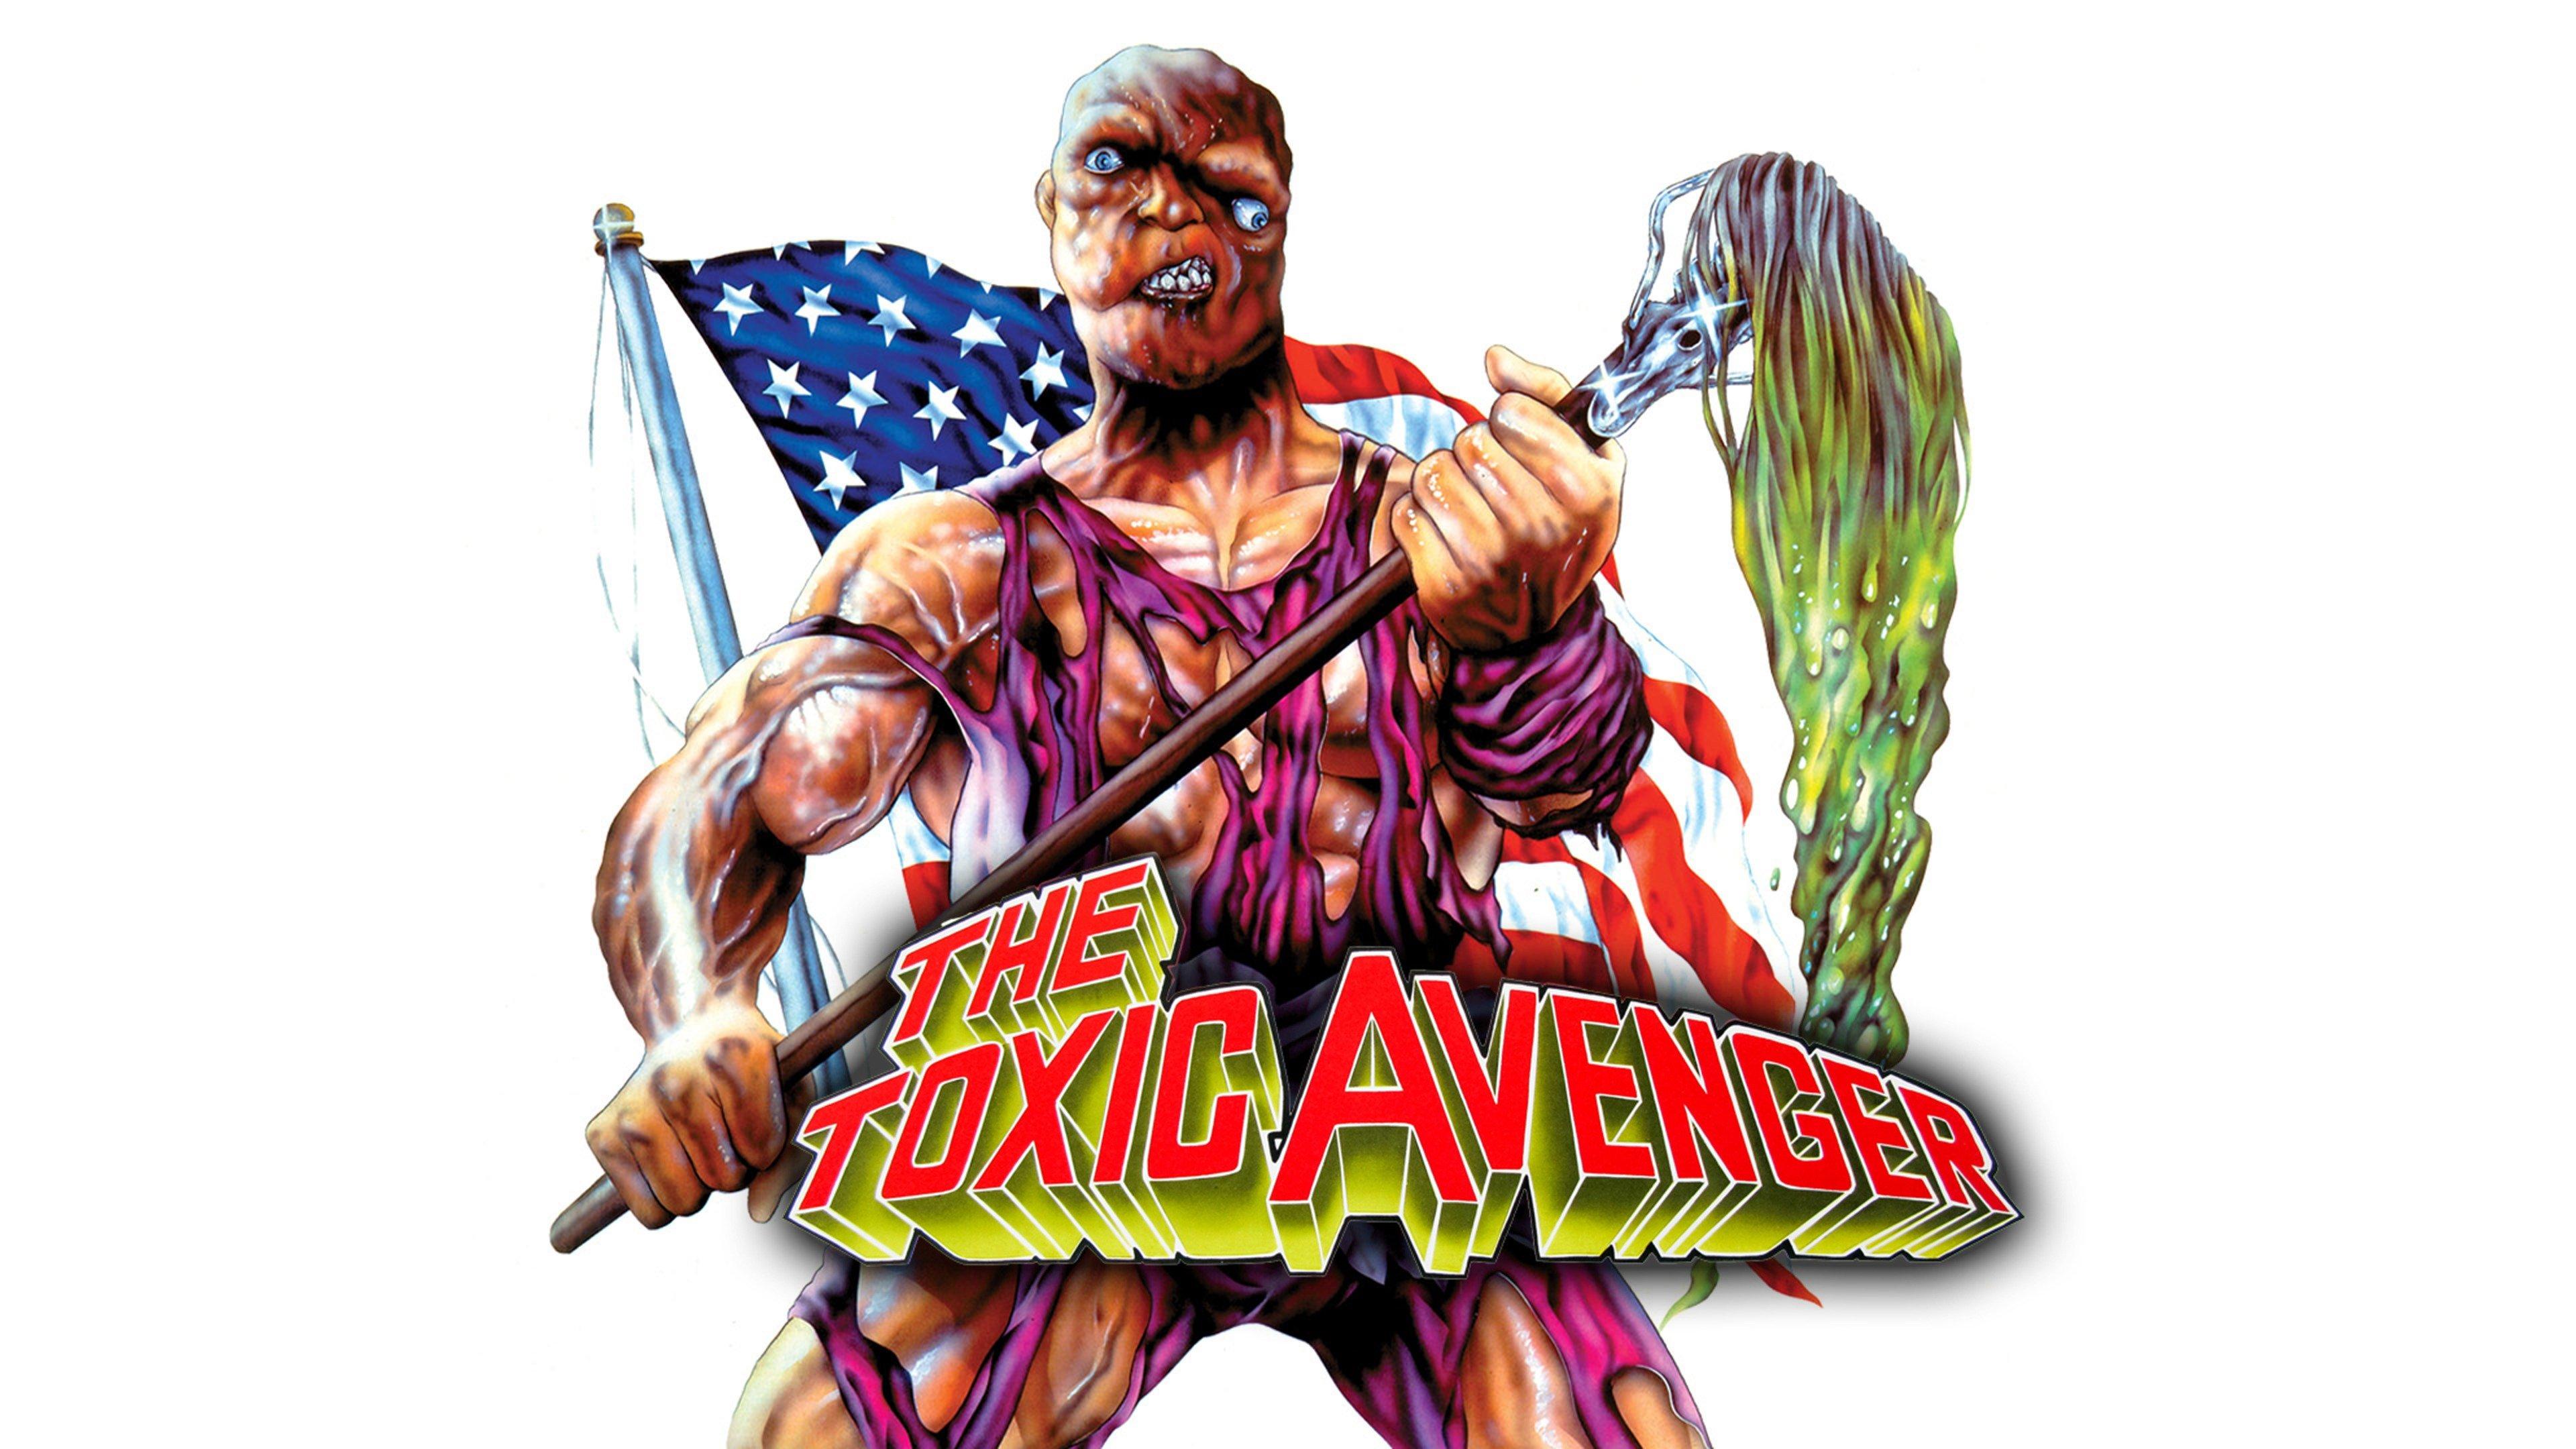 Watch The Toxic Avenger Streaming Online on Philo (Free Trial)